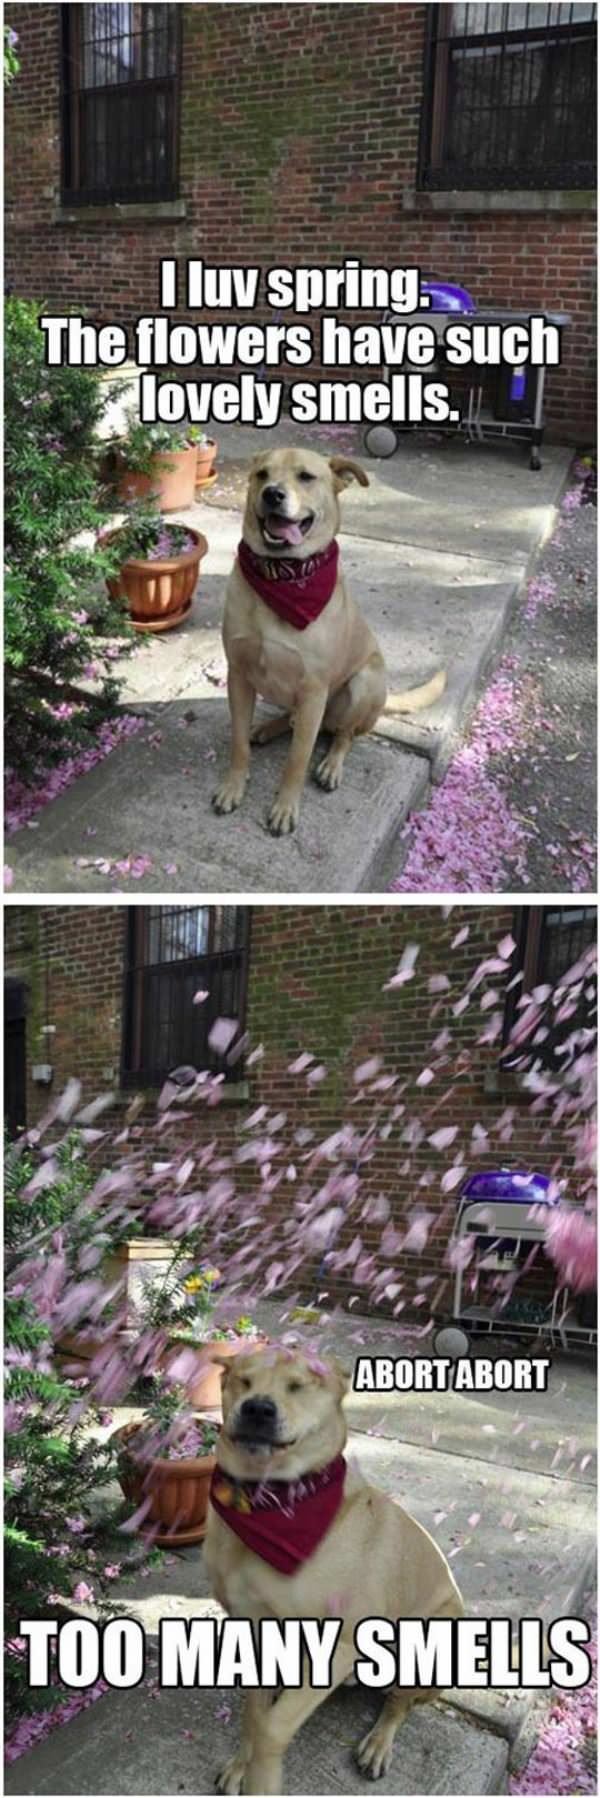 i really love the spring funny picture